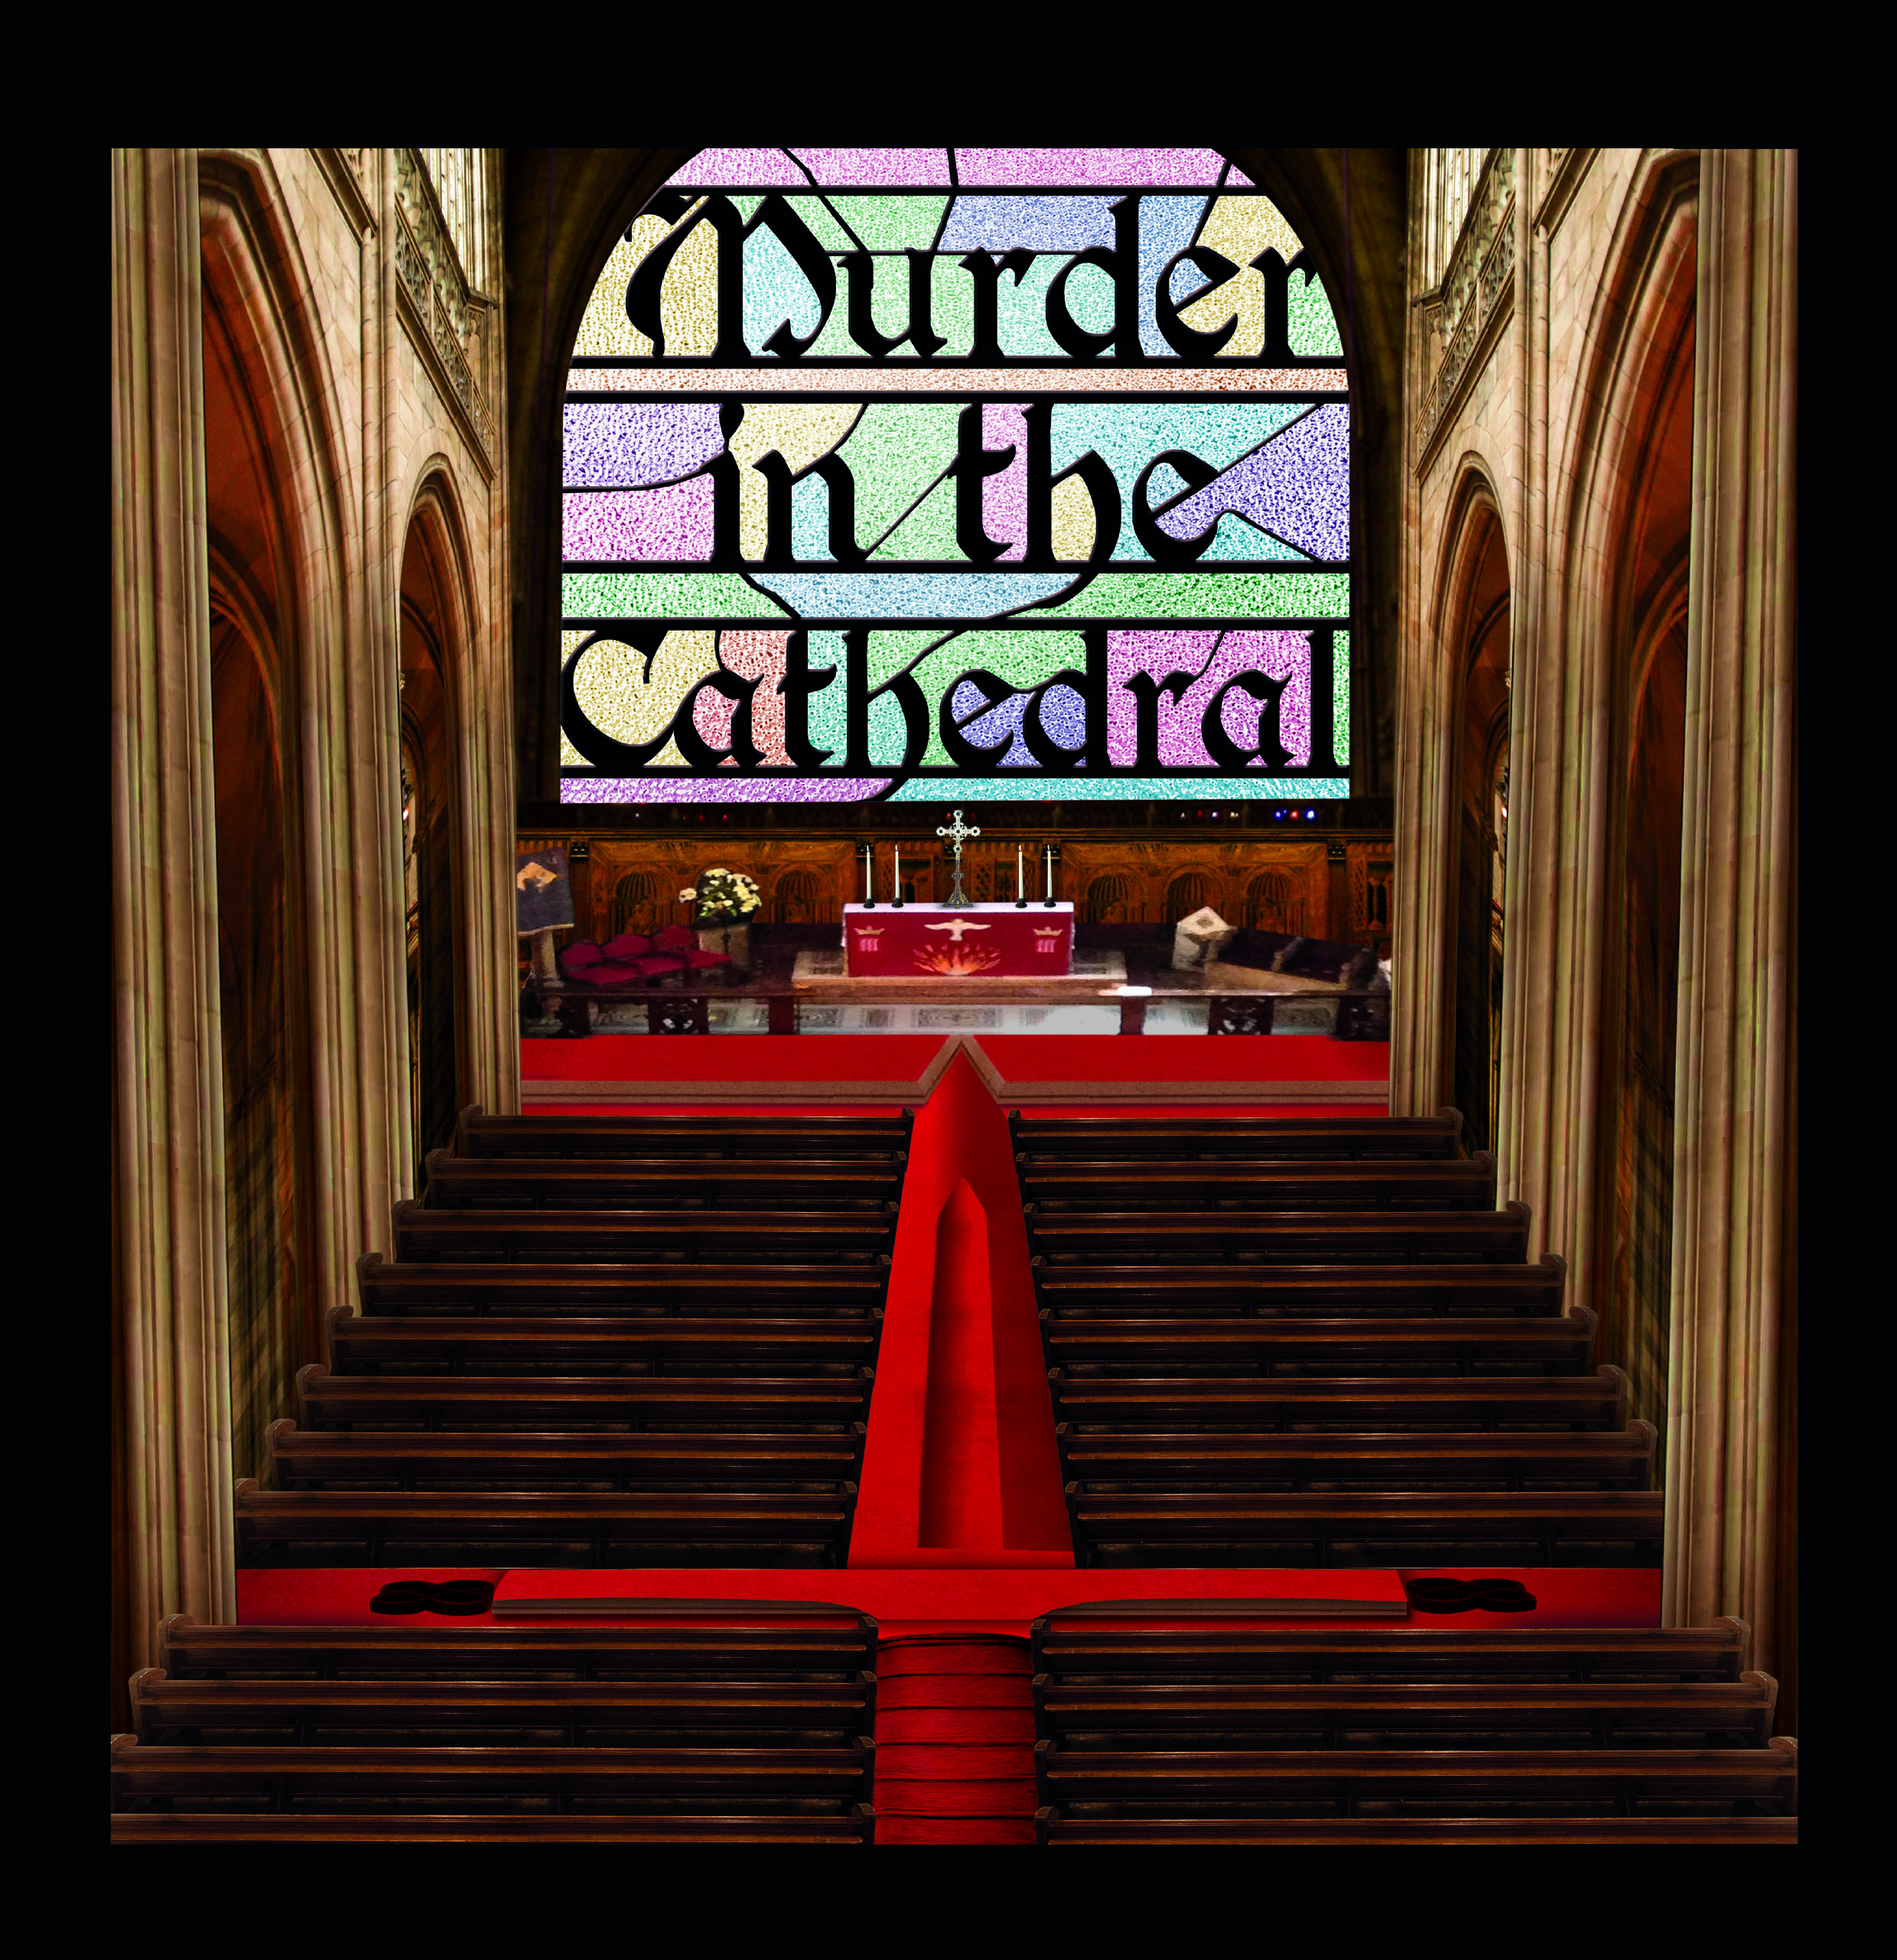 The Dulwich Players present Murder in the Cathedral by T. S. Eliot